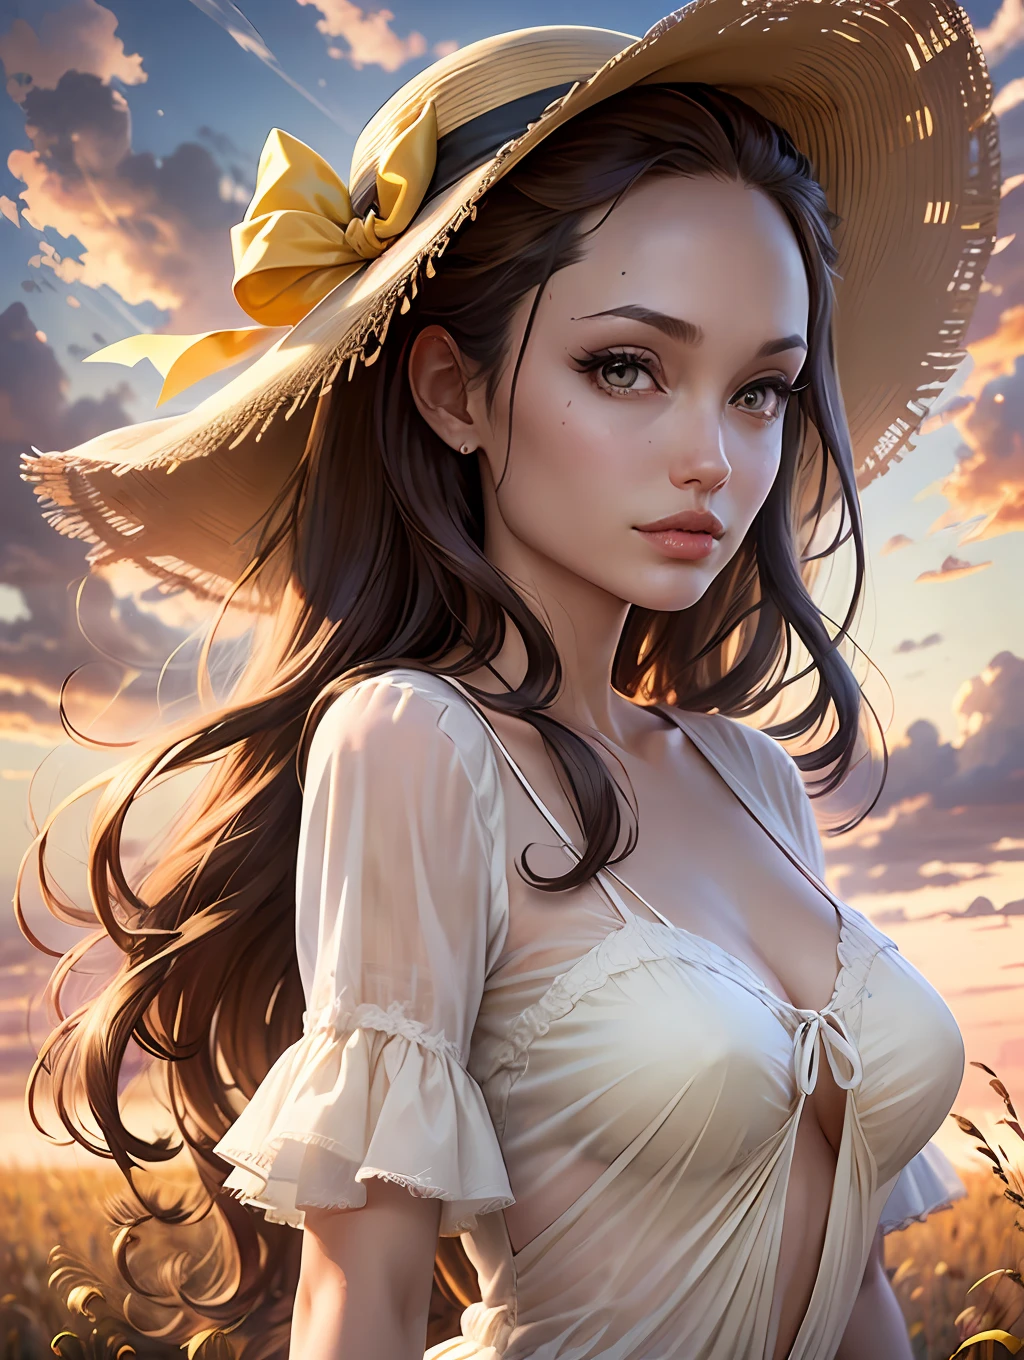 Original Characters, Natural Volumetric Lighting And Best Shadows, Deep Depth Of Field, Sharp Focus, Portrait Of Stunningly Beautiful  Girl, Soft Delicate Beautiful Attractive Face With Alluring Brown Eyes, Lovely Medium Small Breasts, Sharp Eyeliner, Seductive Smiling, Closed Mouth, Windswept Disheveled Brown Hair, Thick Layered Medium Hairstyles, Blush Eyeshadow With Thick Eyelashes, Parted Lips, Oversized Straw Sun Hat, Single Ribbon Bow, White Rustic One-piece Dress Long, (Flutter In The Wind:1.1), (Ripe Yellow Rye Field Under Beautiful Summer Sunset Sky With Clouds:1.2), (Highest Quality, Amazing Details:1.4), Masterpiece, Bloom, Picturesque, Vivid Watercolor Paintings --auto --s2